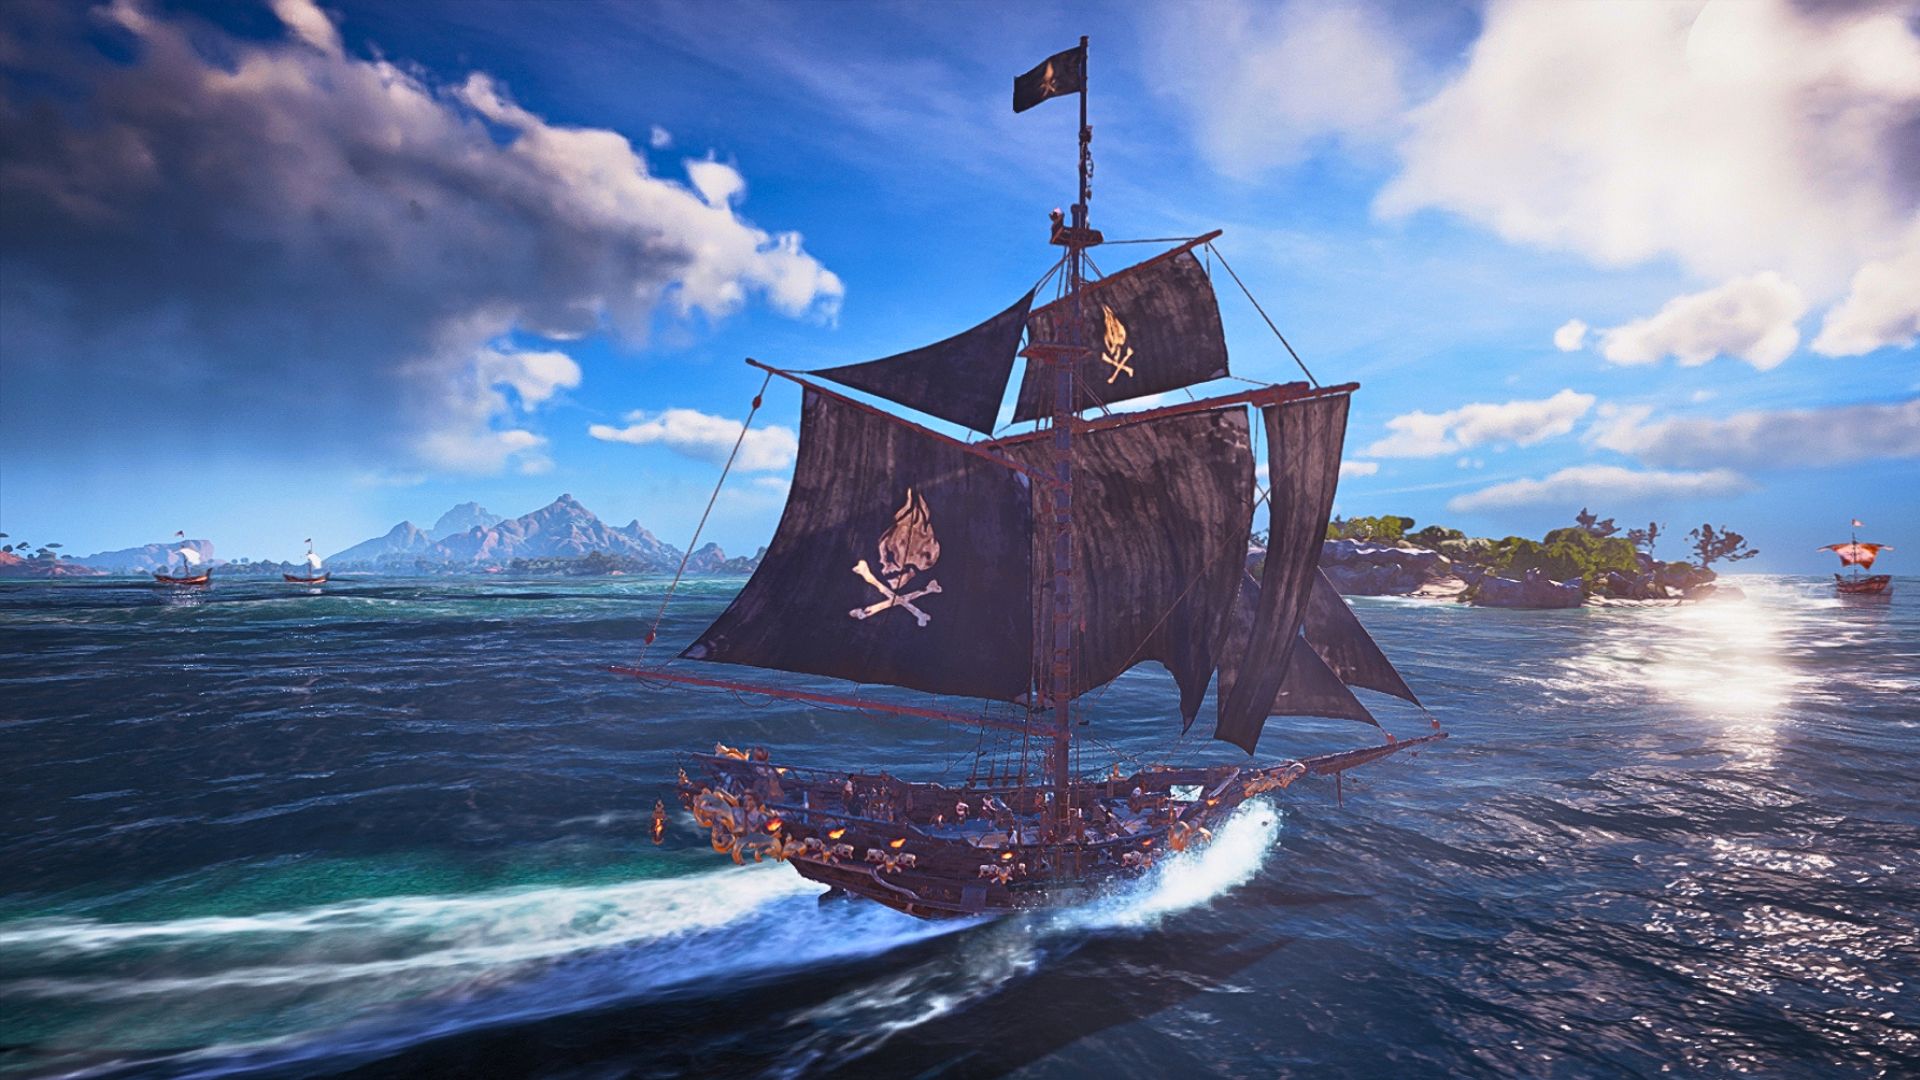 Skull and Bones review – a bad pirate game 11 years in the making